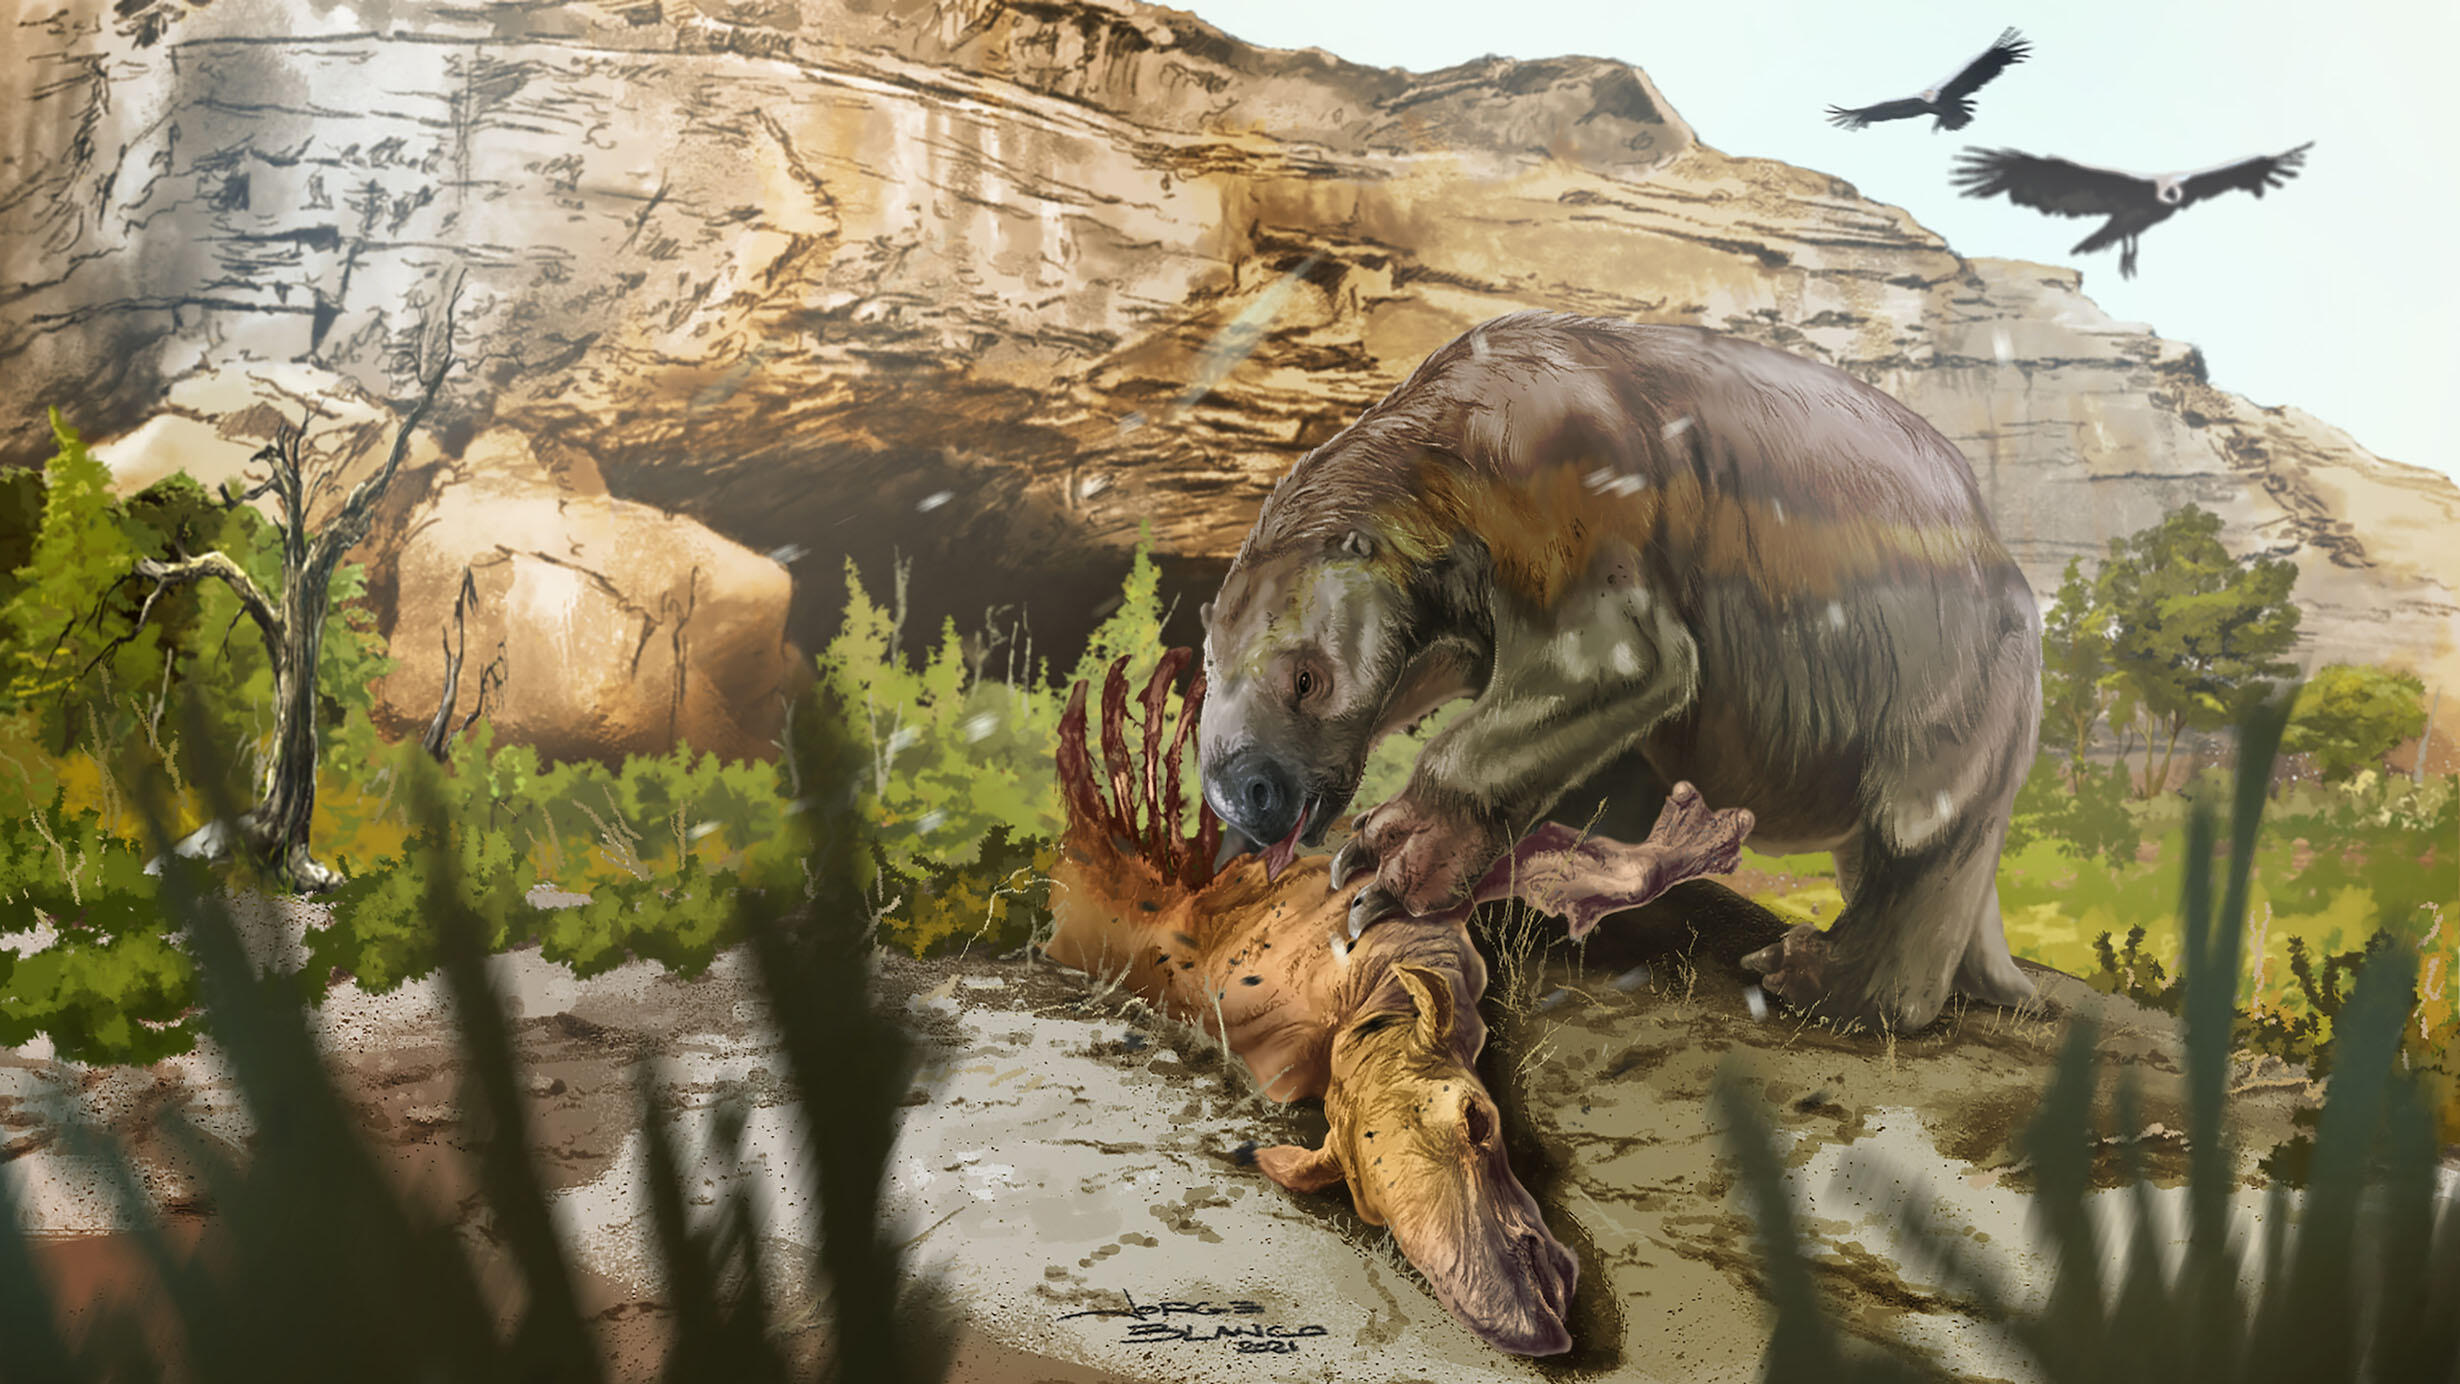 Artist's rendering of a giant ground sloth, Mylodon, standing near a rocky outcrop and devouring the carcass of a smaller mammal, Macrauchenia.